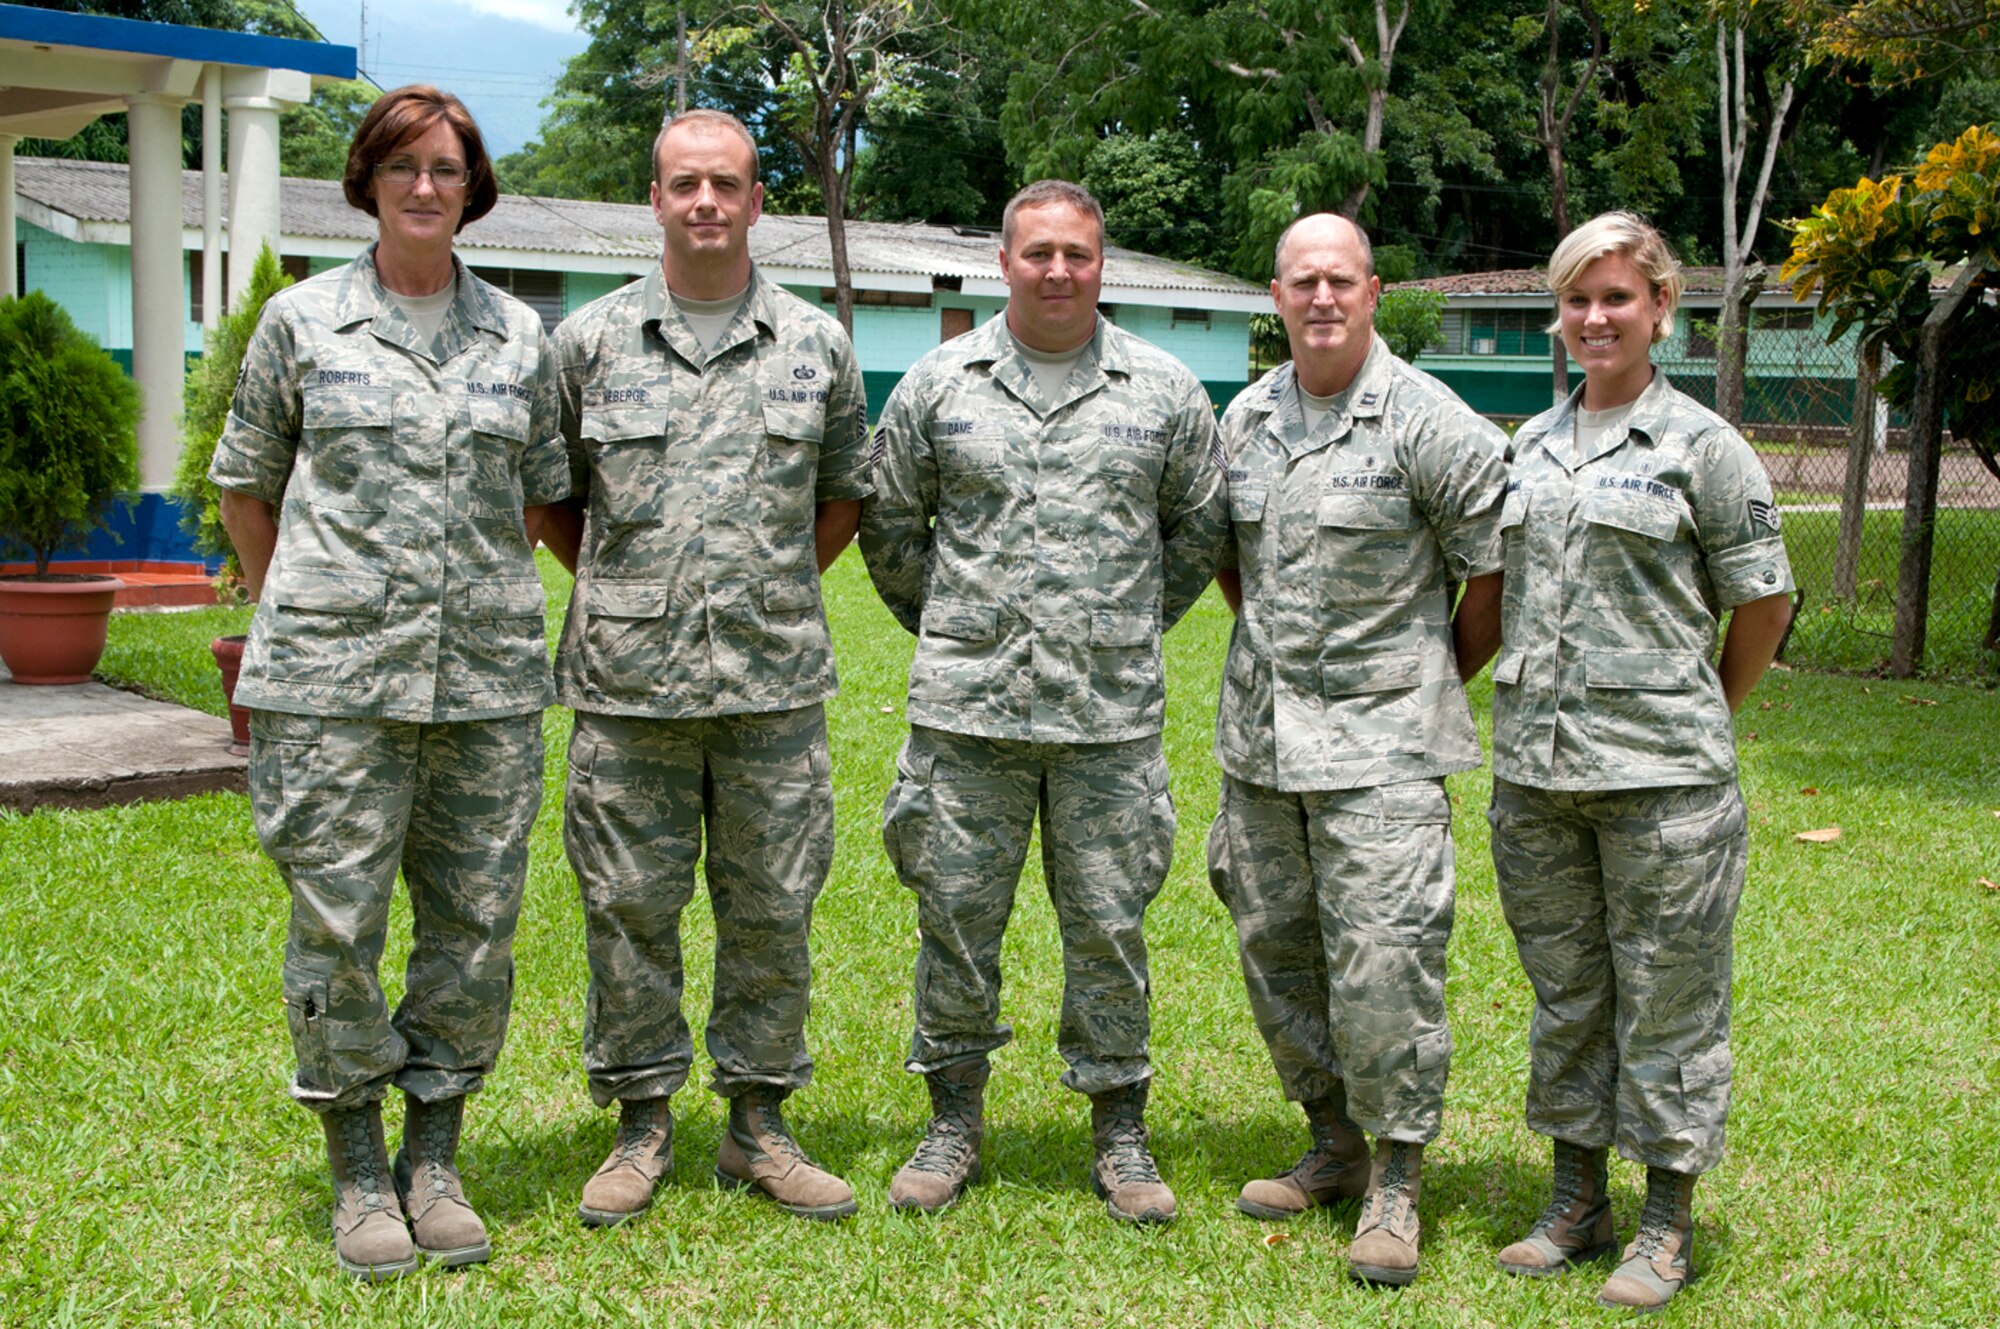 Master Sgt. Sandy Roberts (left), Tech. Sgt. Shawn Theberge, Tech. Sgt. Michael Dame, Capt. Rex Rubin, and Senior Airman Alexa Shimmel, all from the 157th Medical Group New England CERFP team, pose for a group photo outside the training complex on base June 26, 2012. The five medical personnel from the New Hampshire Air National Guard traveled here to participate in a Chemical Biological Radiological Nuclear High Yield Explosive Enhanced Response Force Package (CERFP) exchange with local authorities. (N.H. National Guard photo by Tech. Sgt. Mark Wyatt/RELEASED)